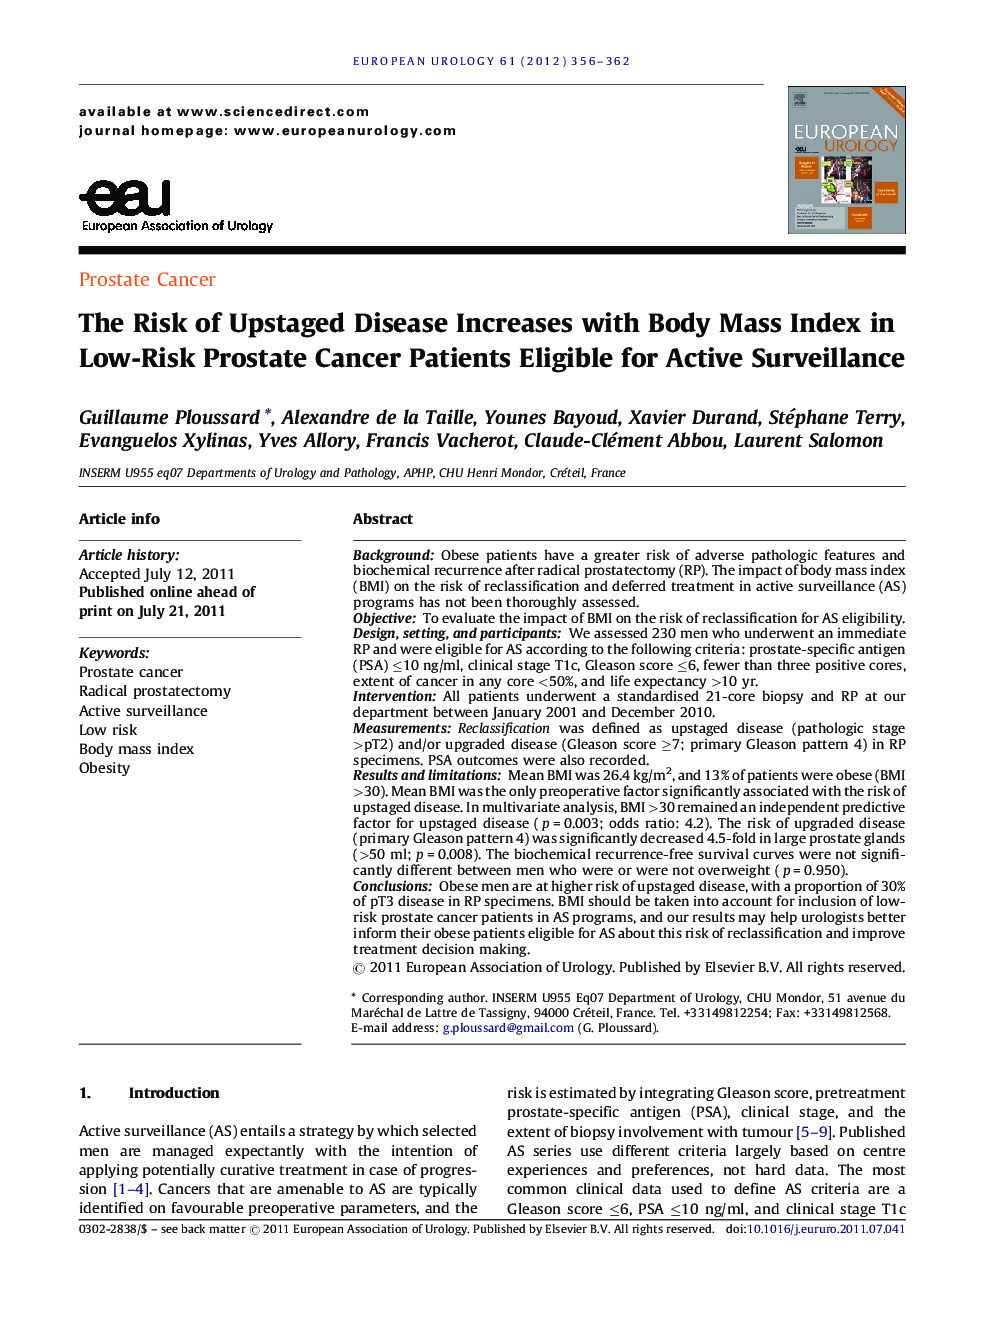 The Risk of Upstaged Disease Increases with Body Mass Index in Low-Risk Prostate Cancer Patients Eligible for Active Surveillance